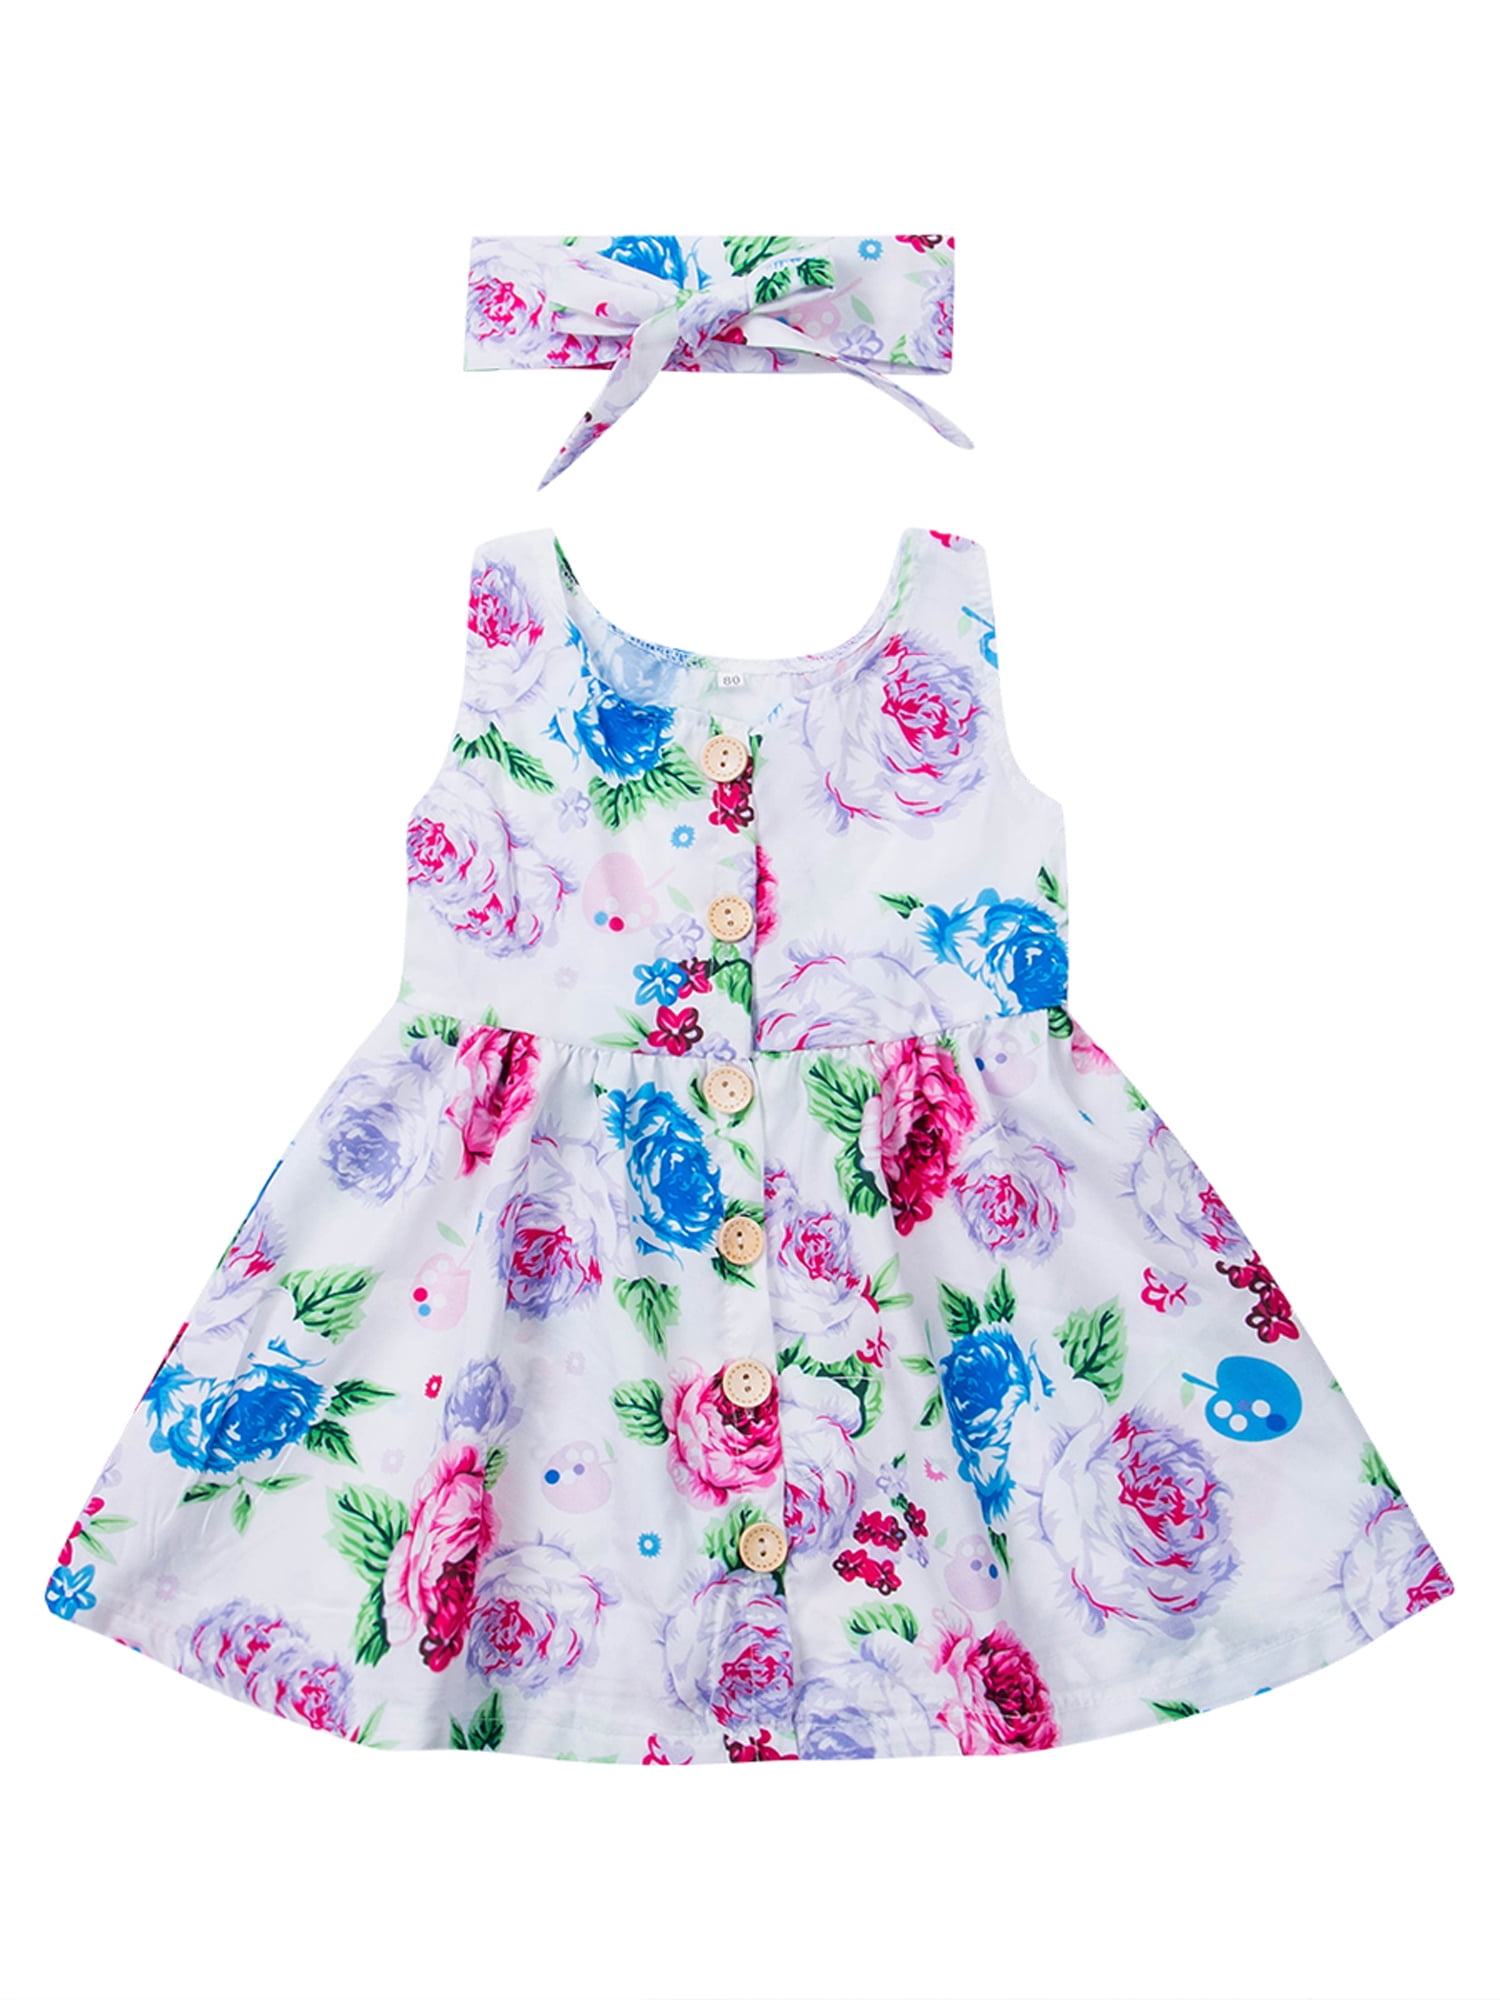 Baby Girls Striped Clothing Bowknot Sleeveless Dress Princess Party Kids Clothes 